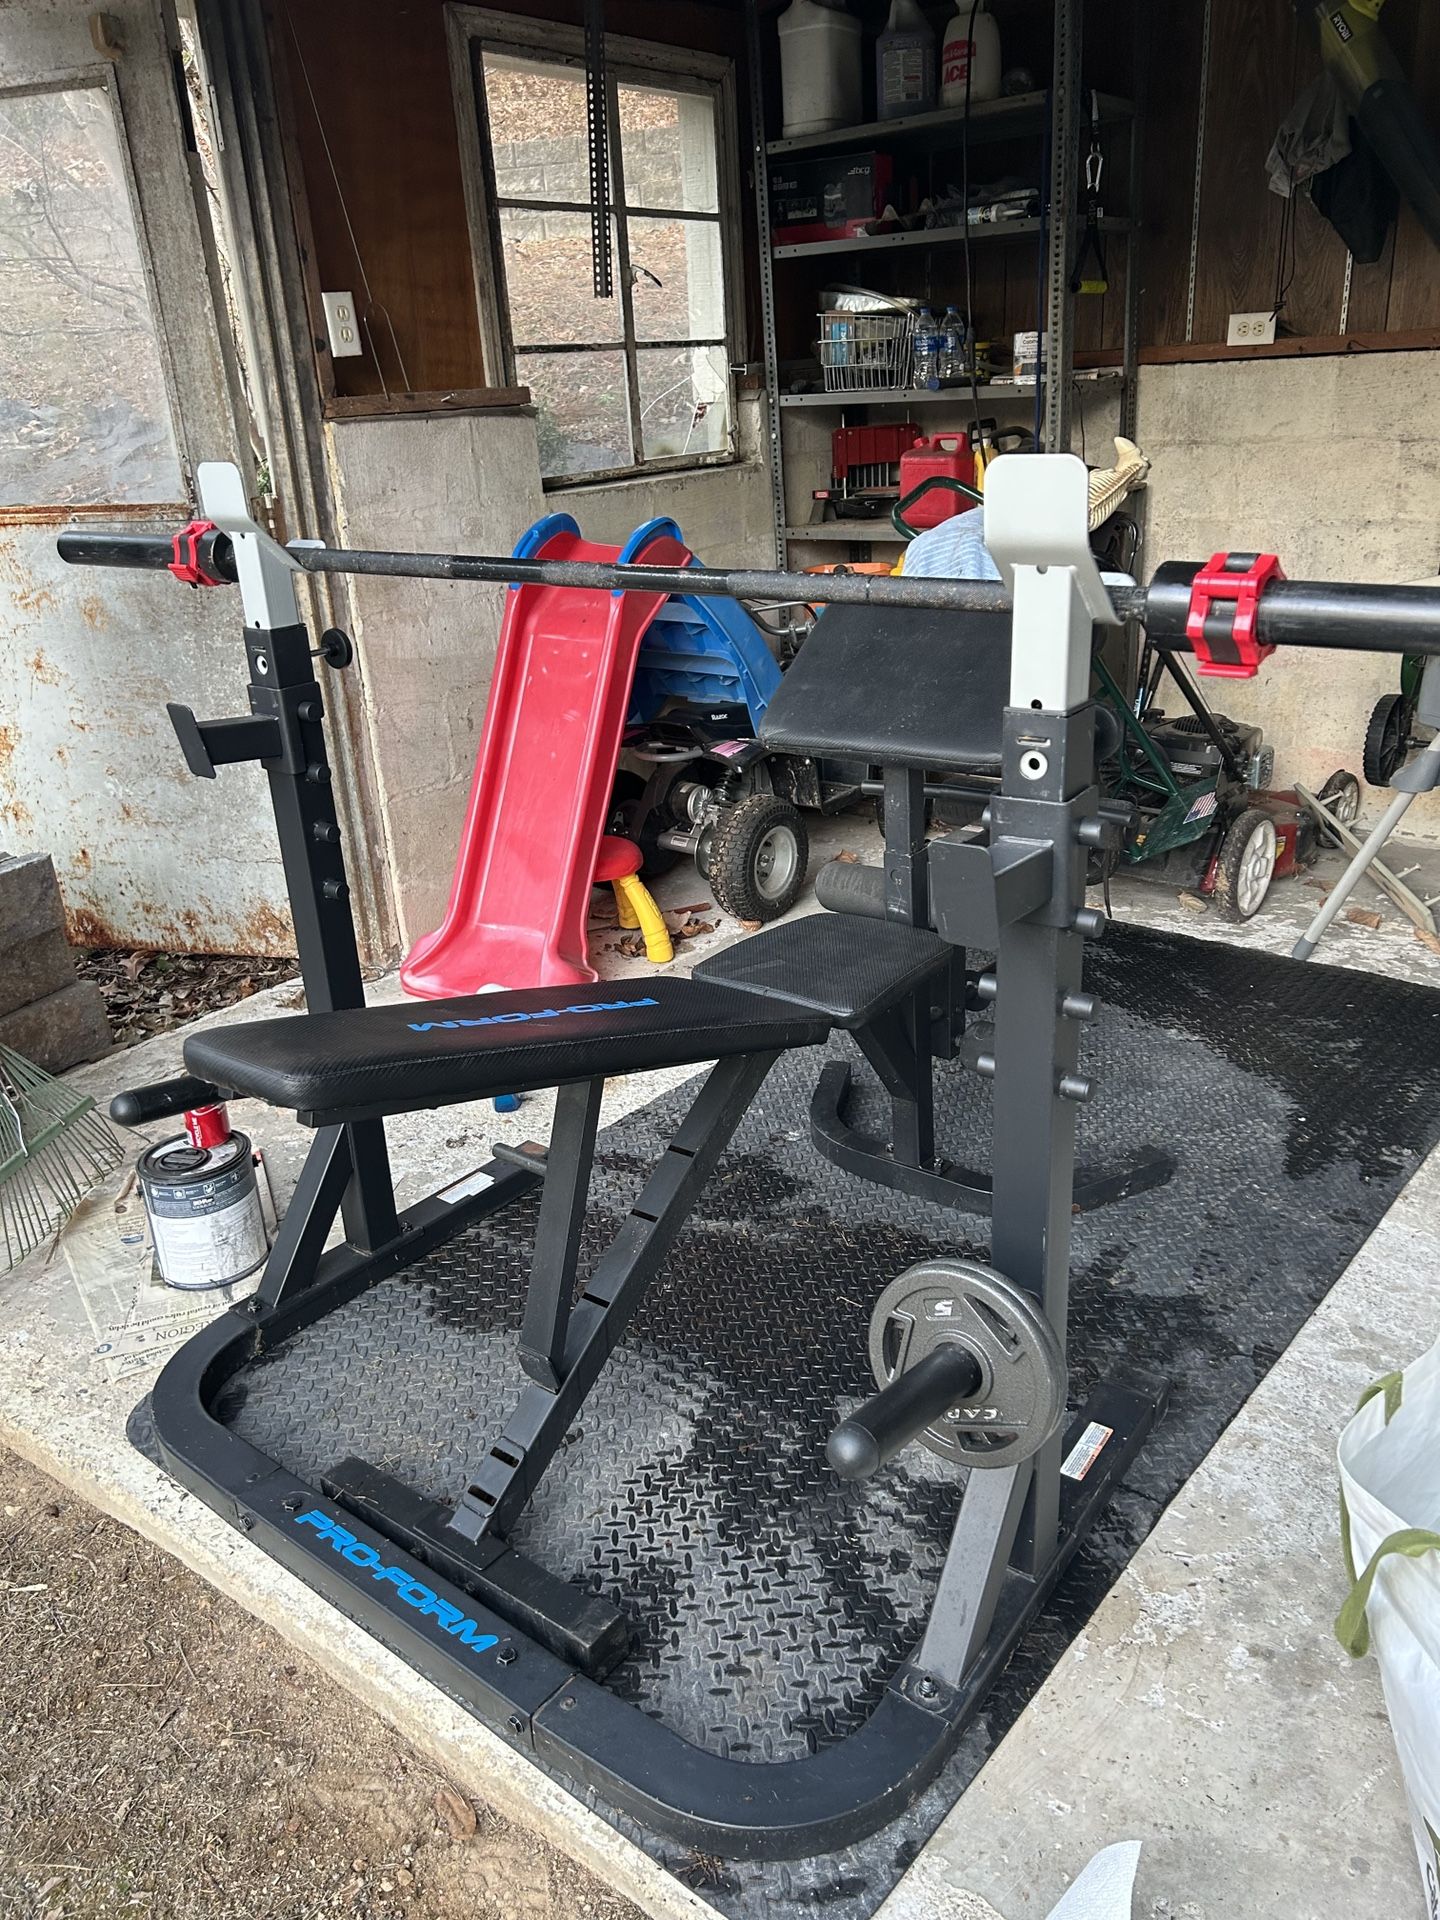 Pro-Form Weight Bench